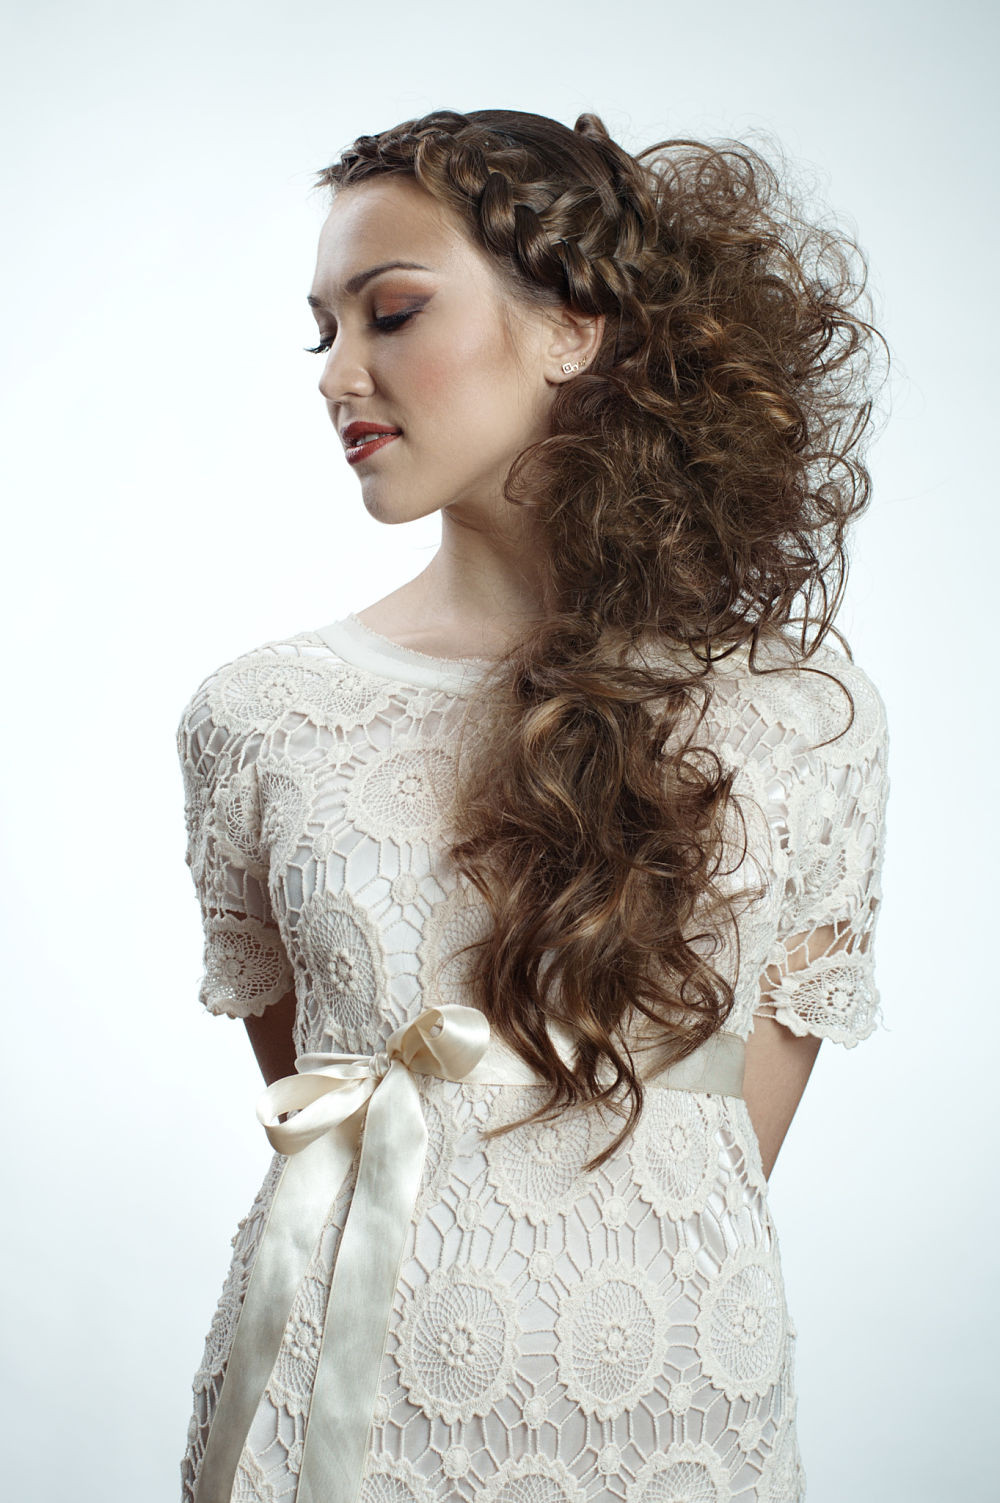 Short Curly Hairstyles For Prom
 Let’s Turn Some Heads DIY Prom Hairstyle ´Dos For Curly